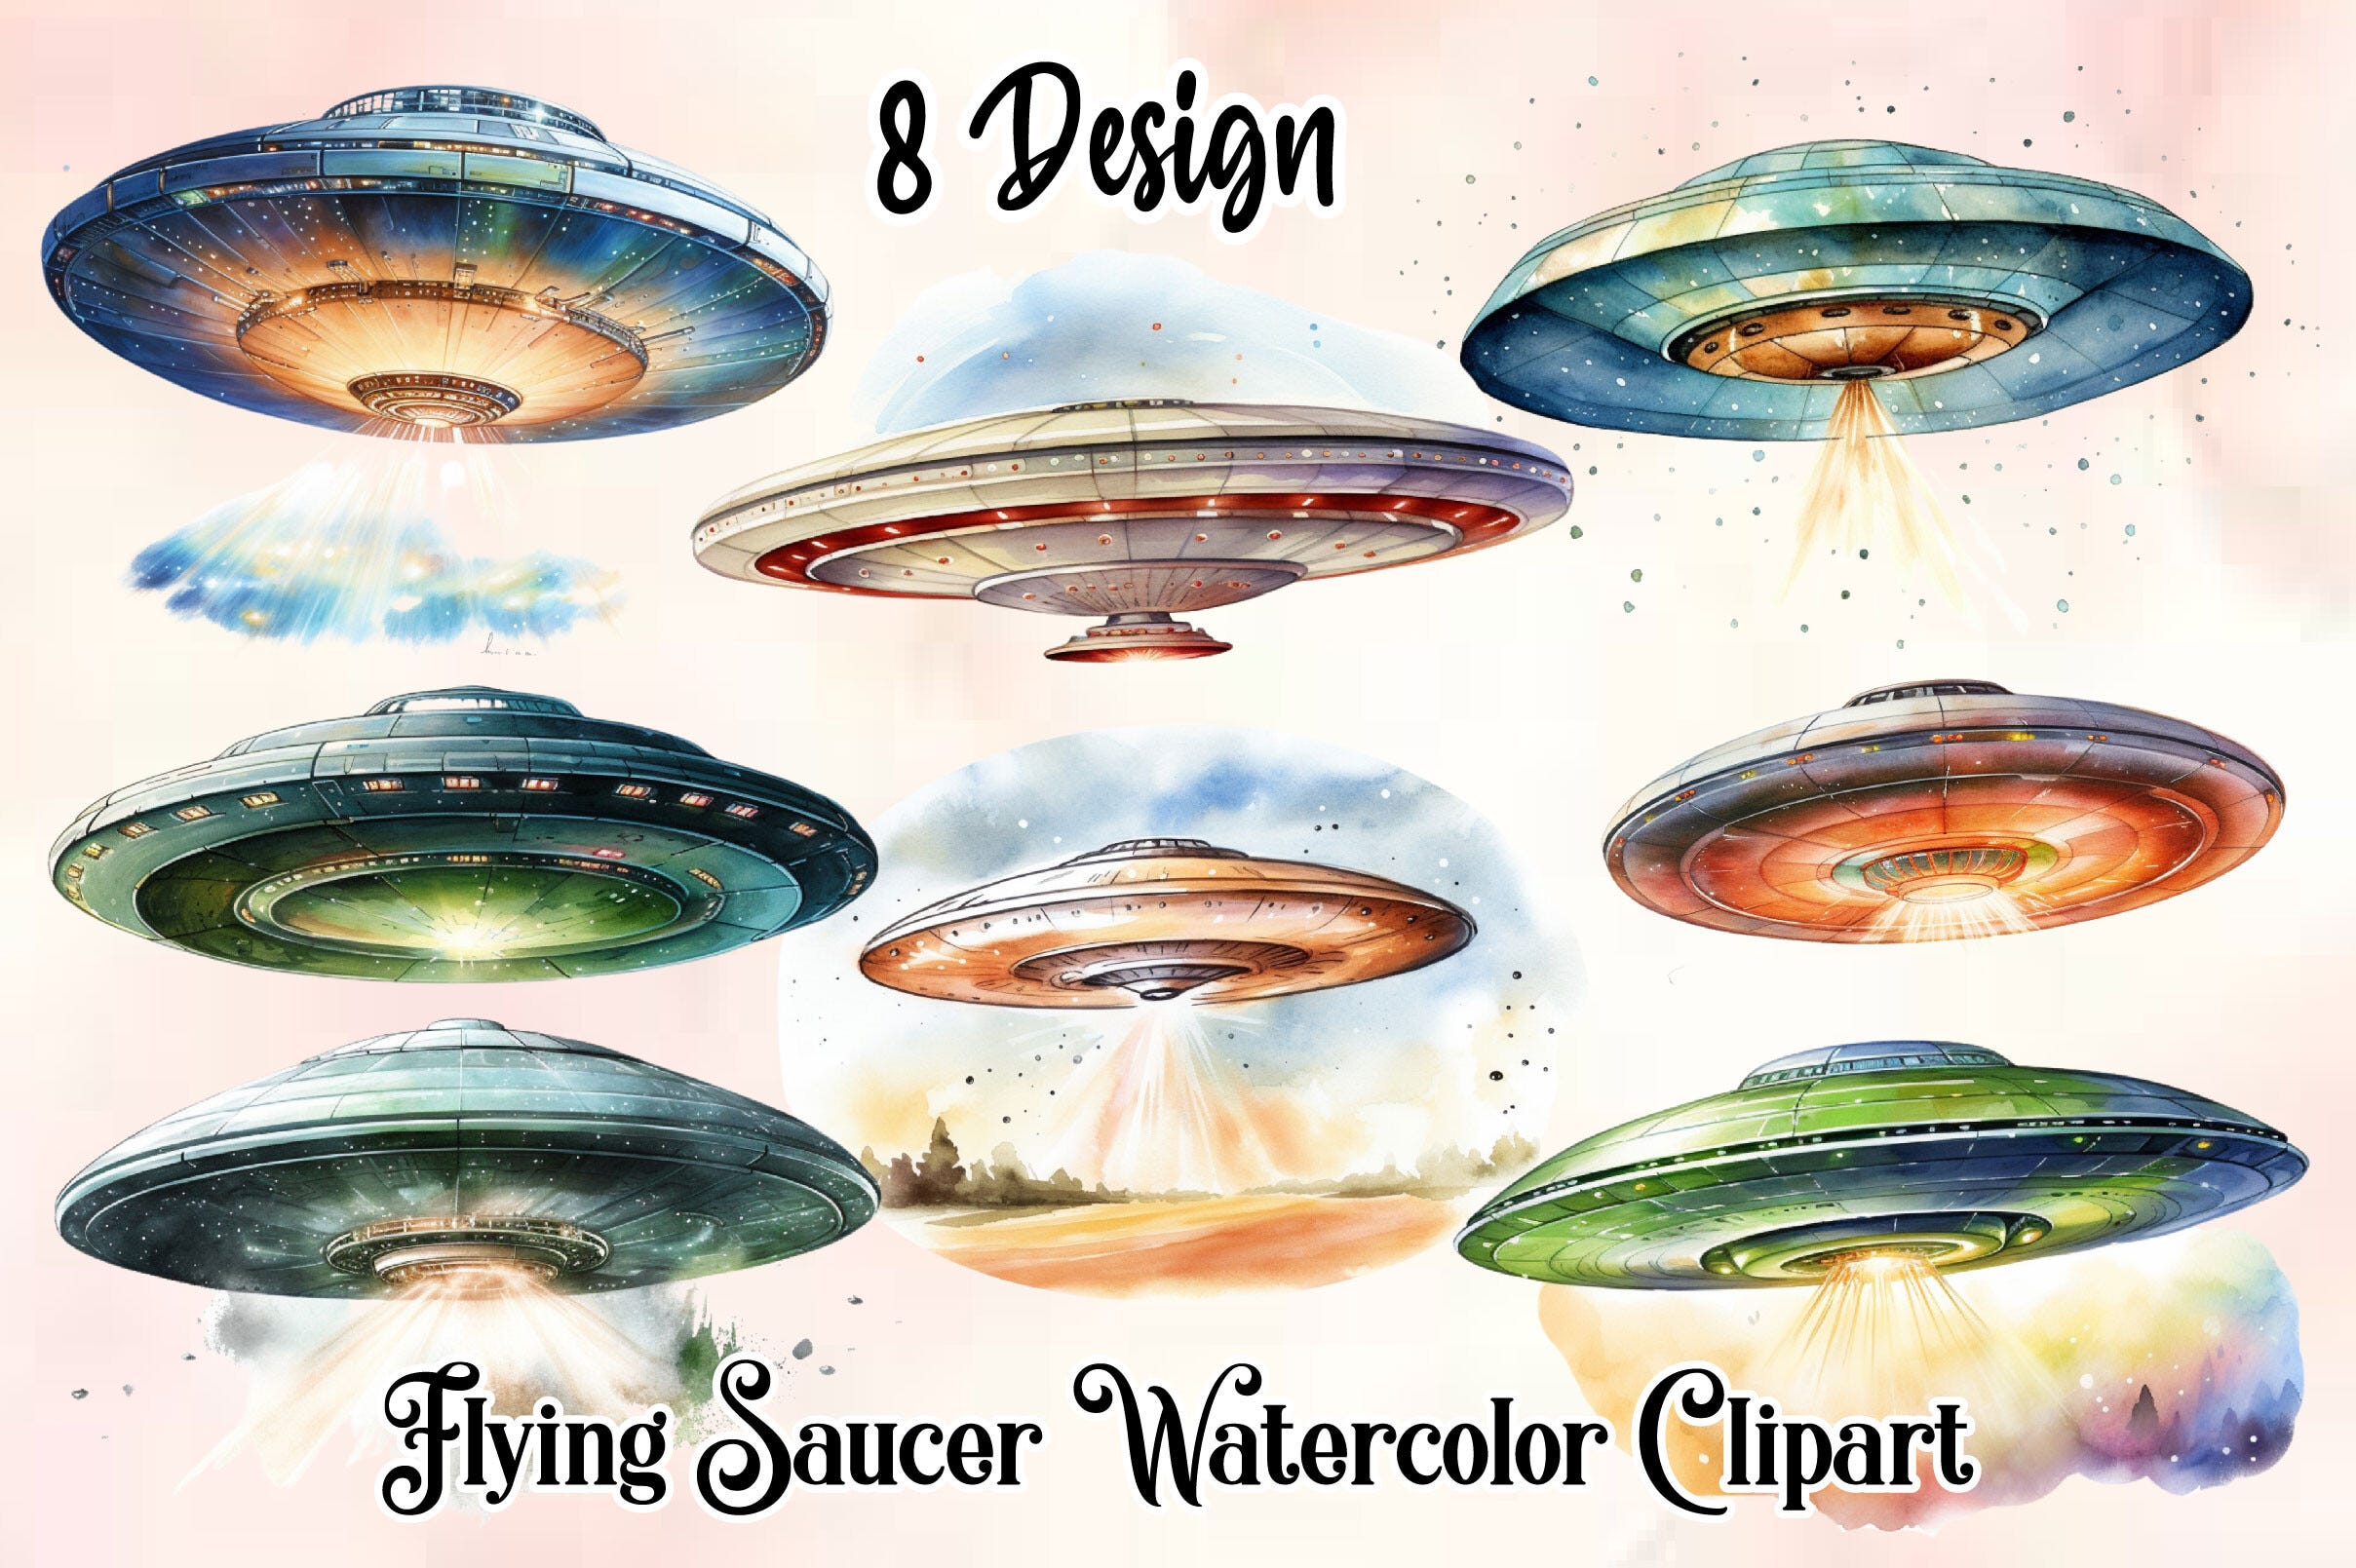 Flying Saucer Watercolor Clipart Free Download